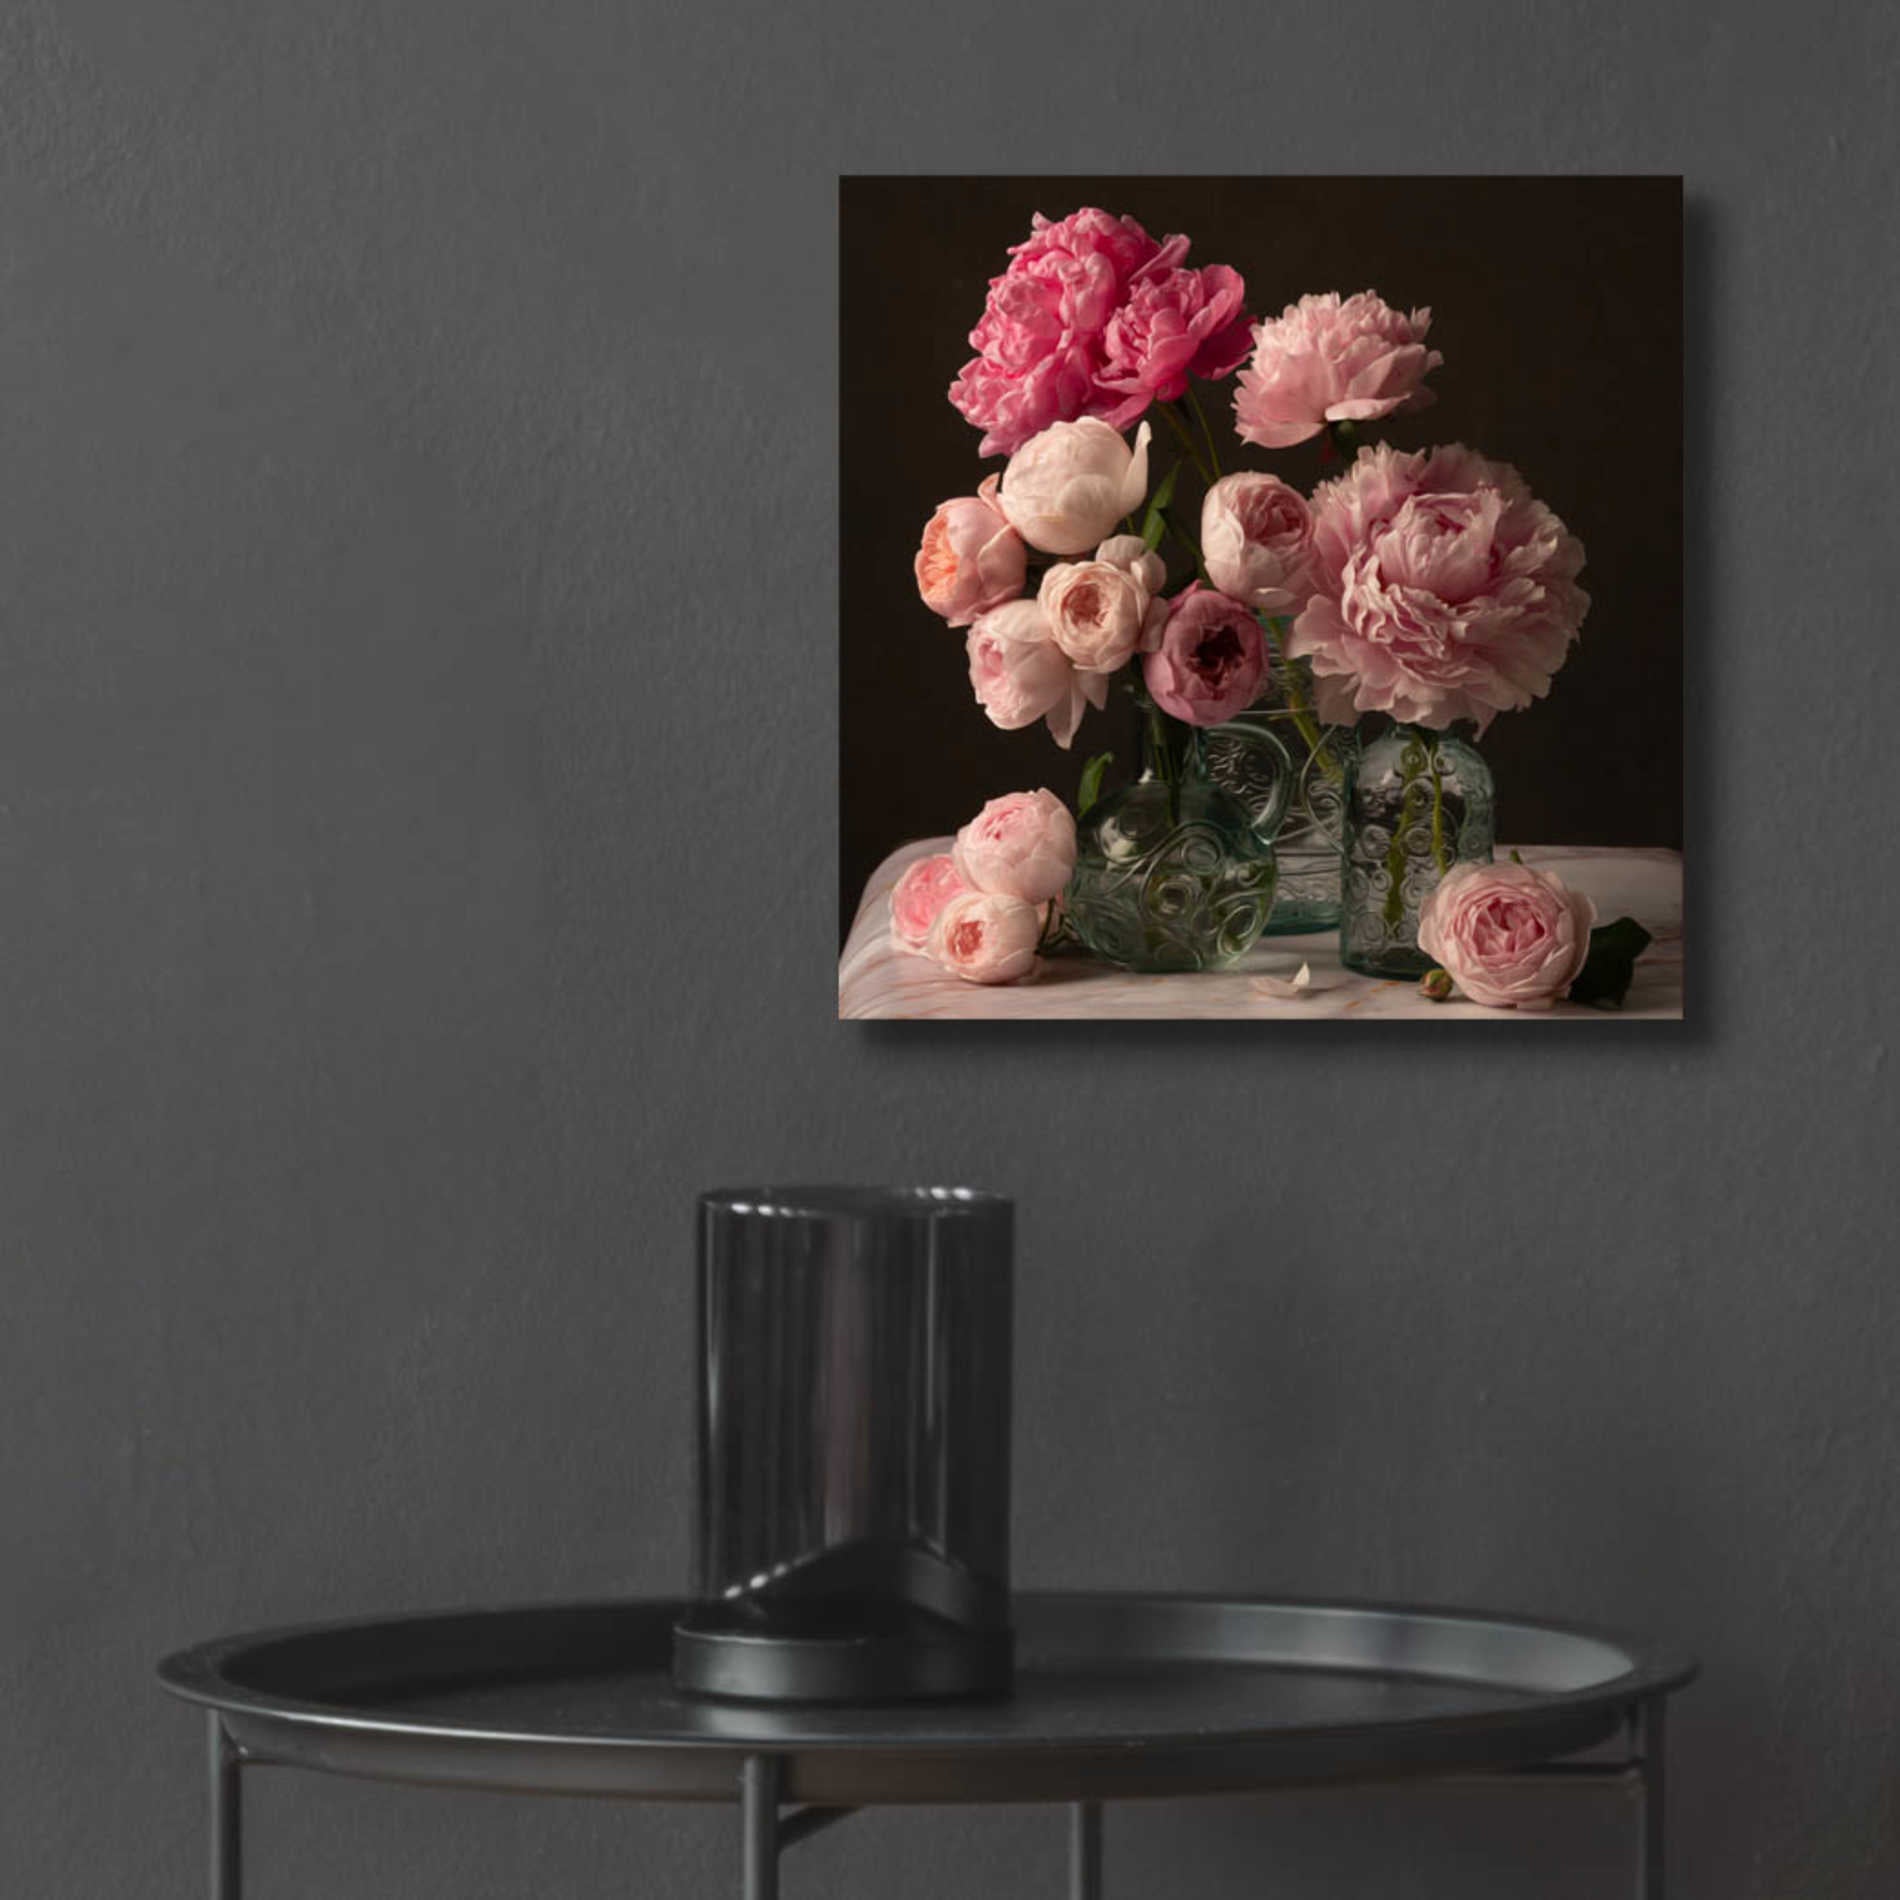 Epic Art 'Rose And Peony Dark Duet' by Leah McLean Acrylic Glass Wall Art,12x12